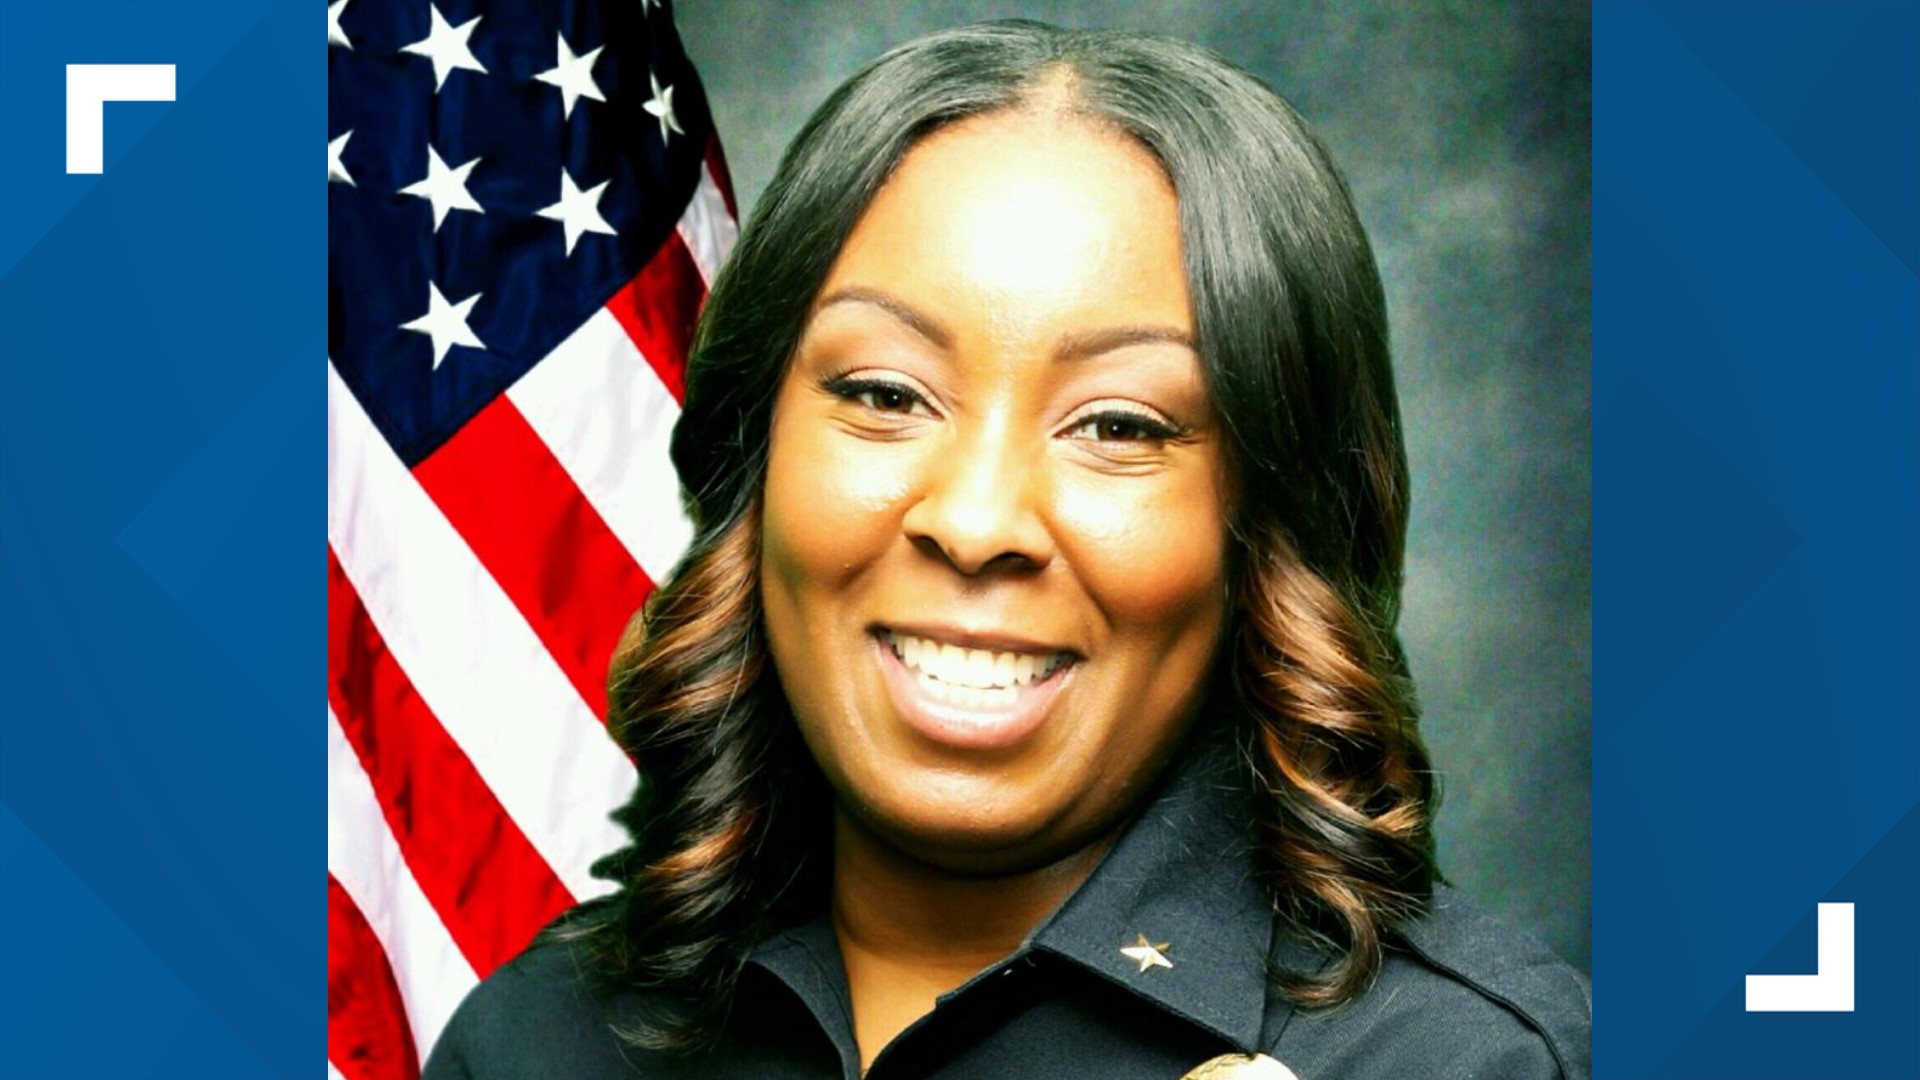 "You can't have an engaged community if they are not informed," said Dr. LaTesha Watson, Sacramento's new overseer of public safety and former Nevada police chief.